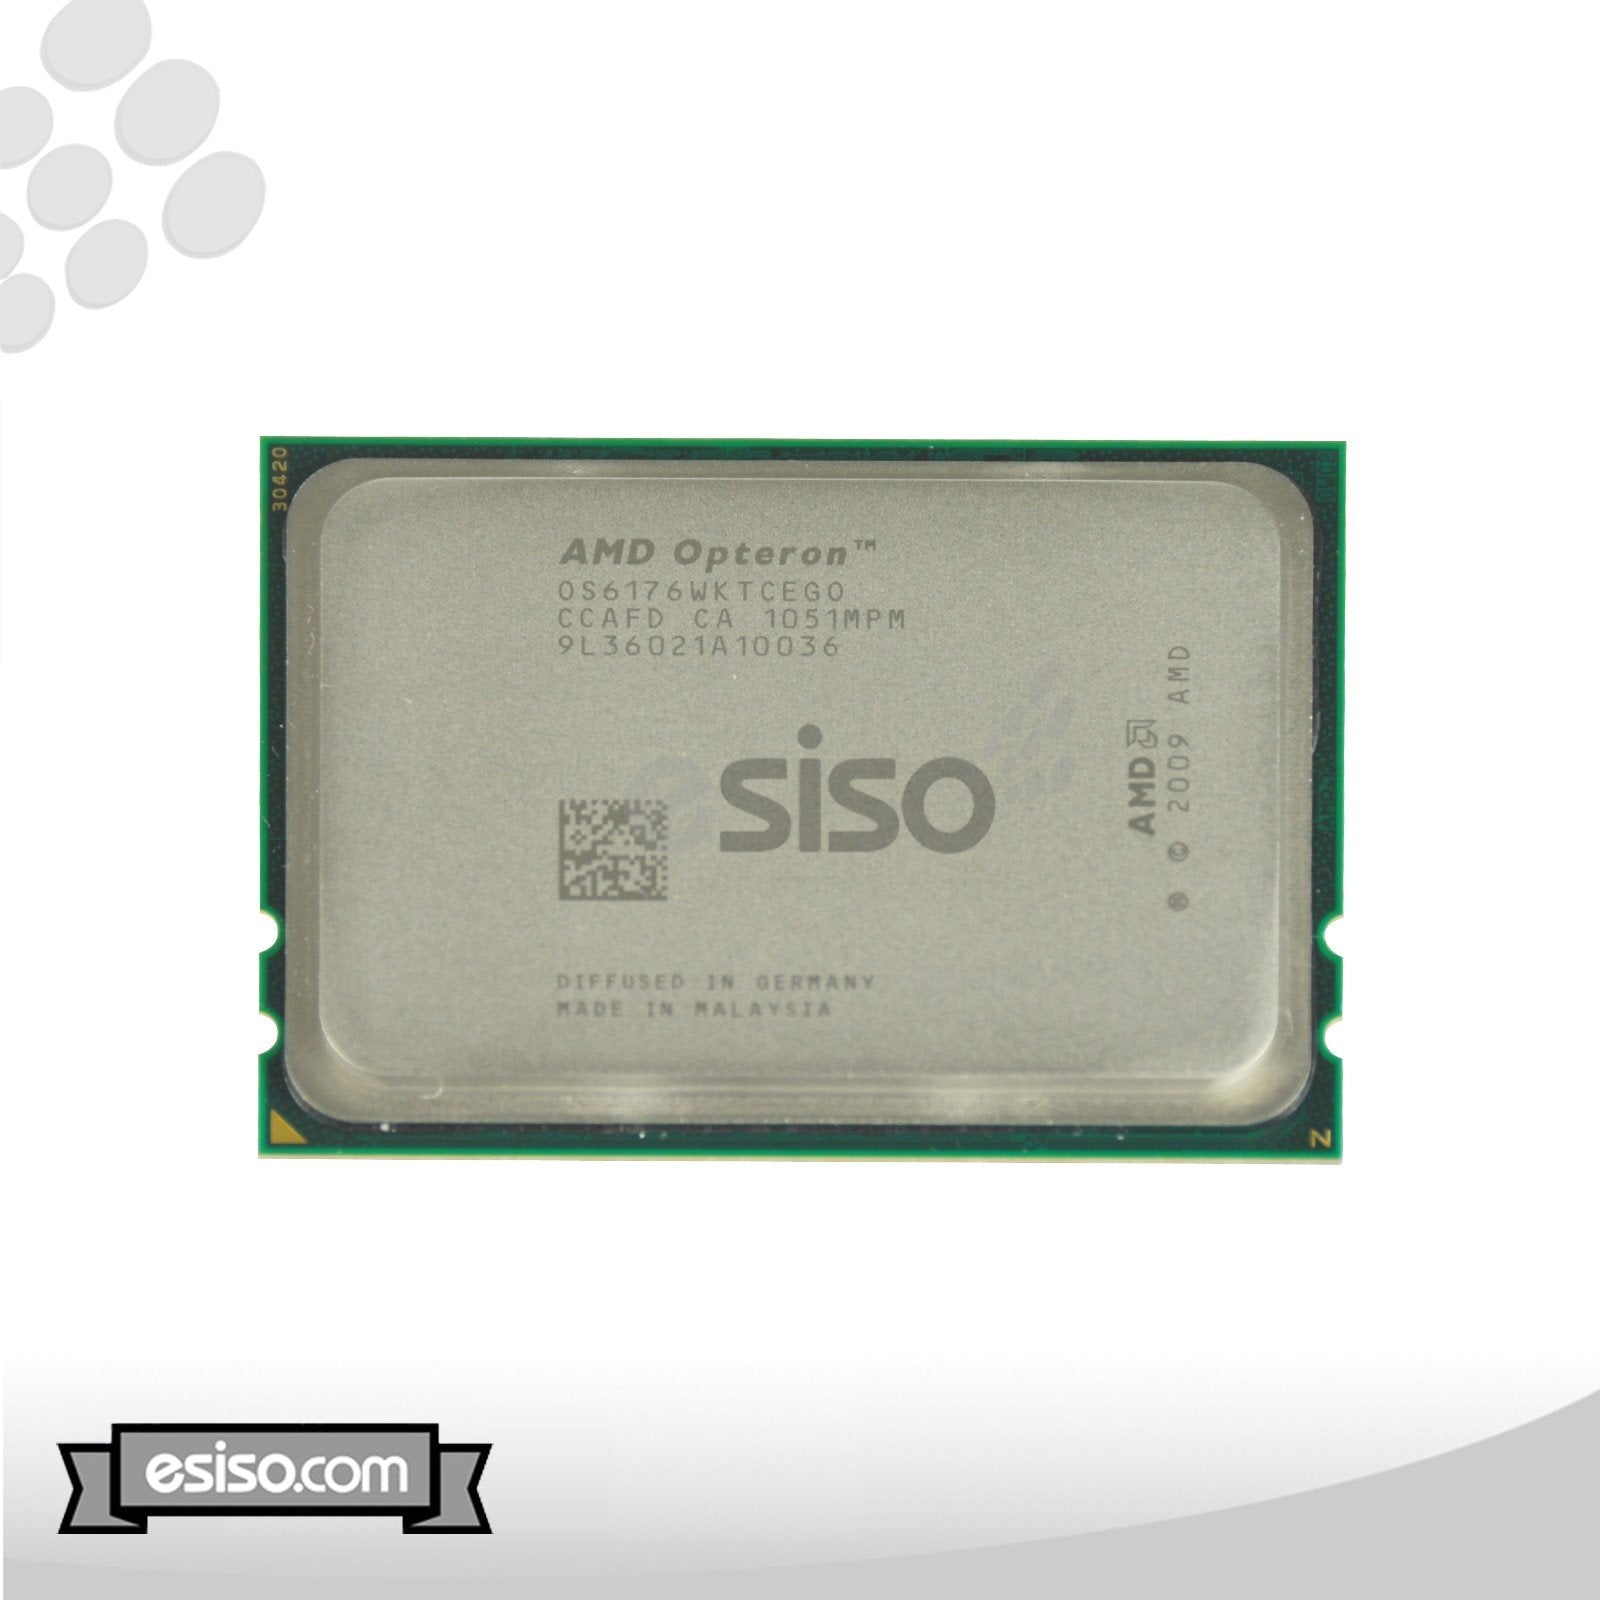 OS6176WKTCEGO AMD OPTERON 6176 2.30GHZ 12MB 12-CORES 115W PROCESSOR